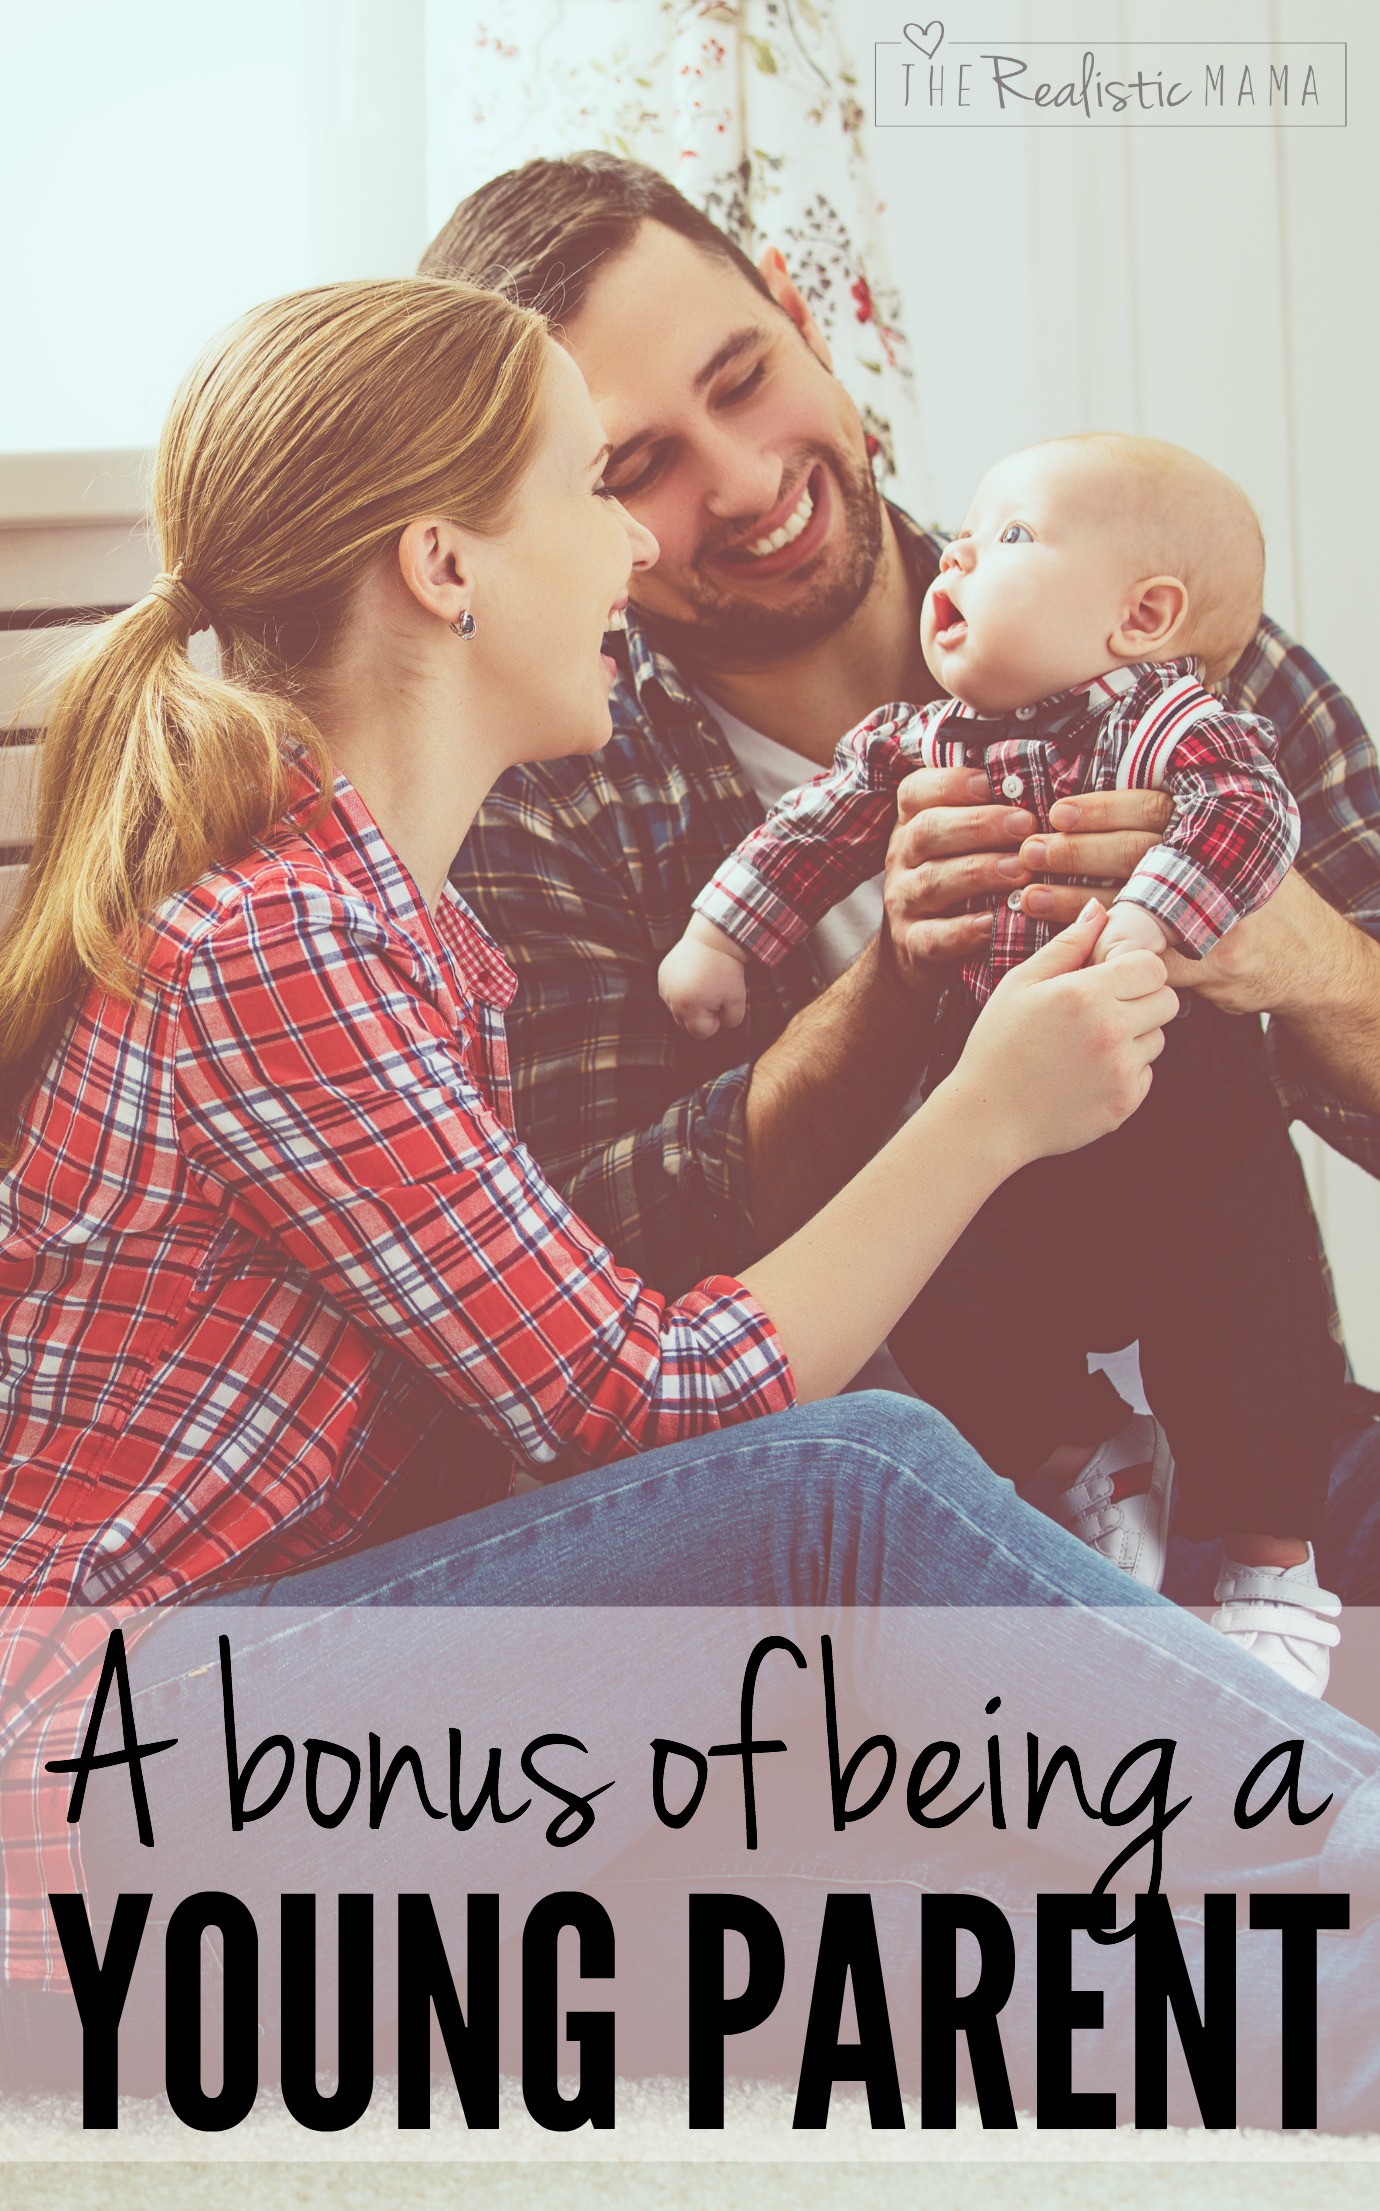 A bonus of being a young parent. This is SO true.